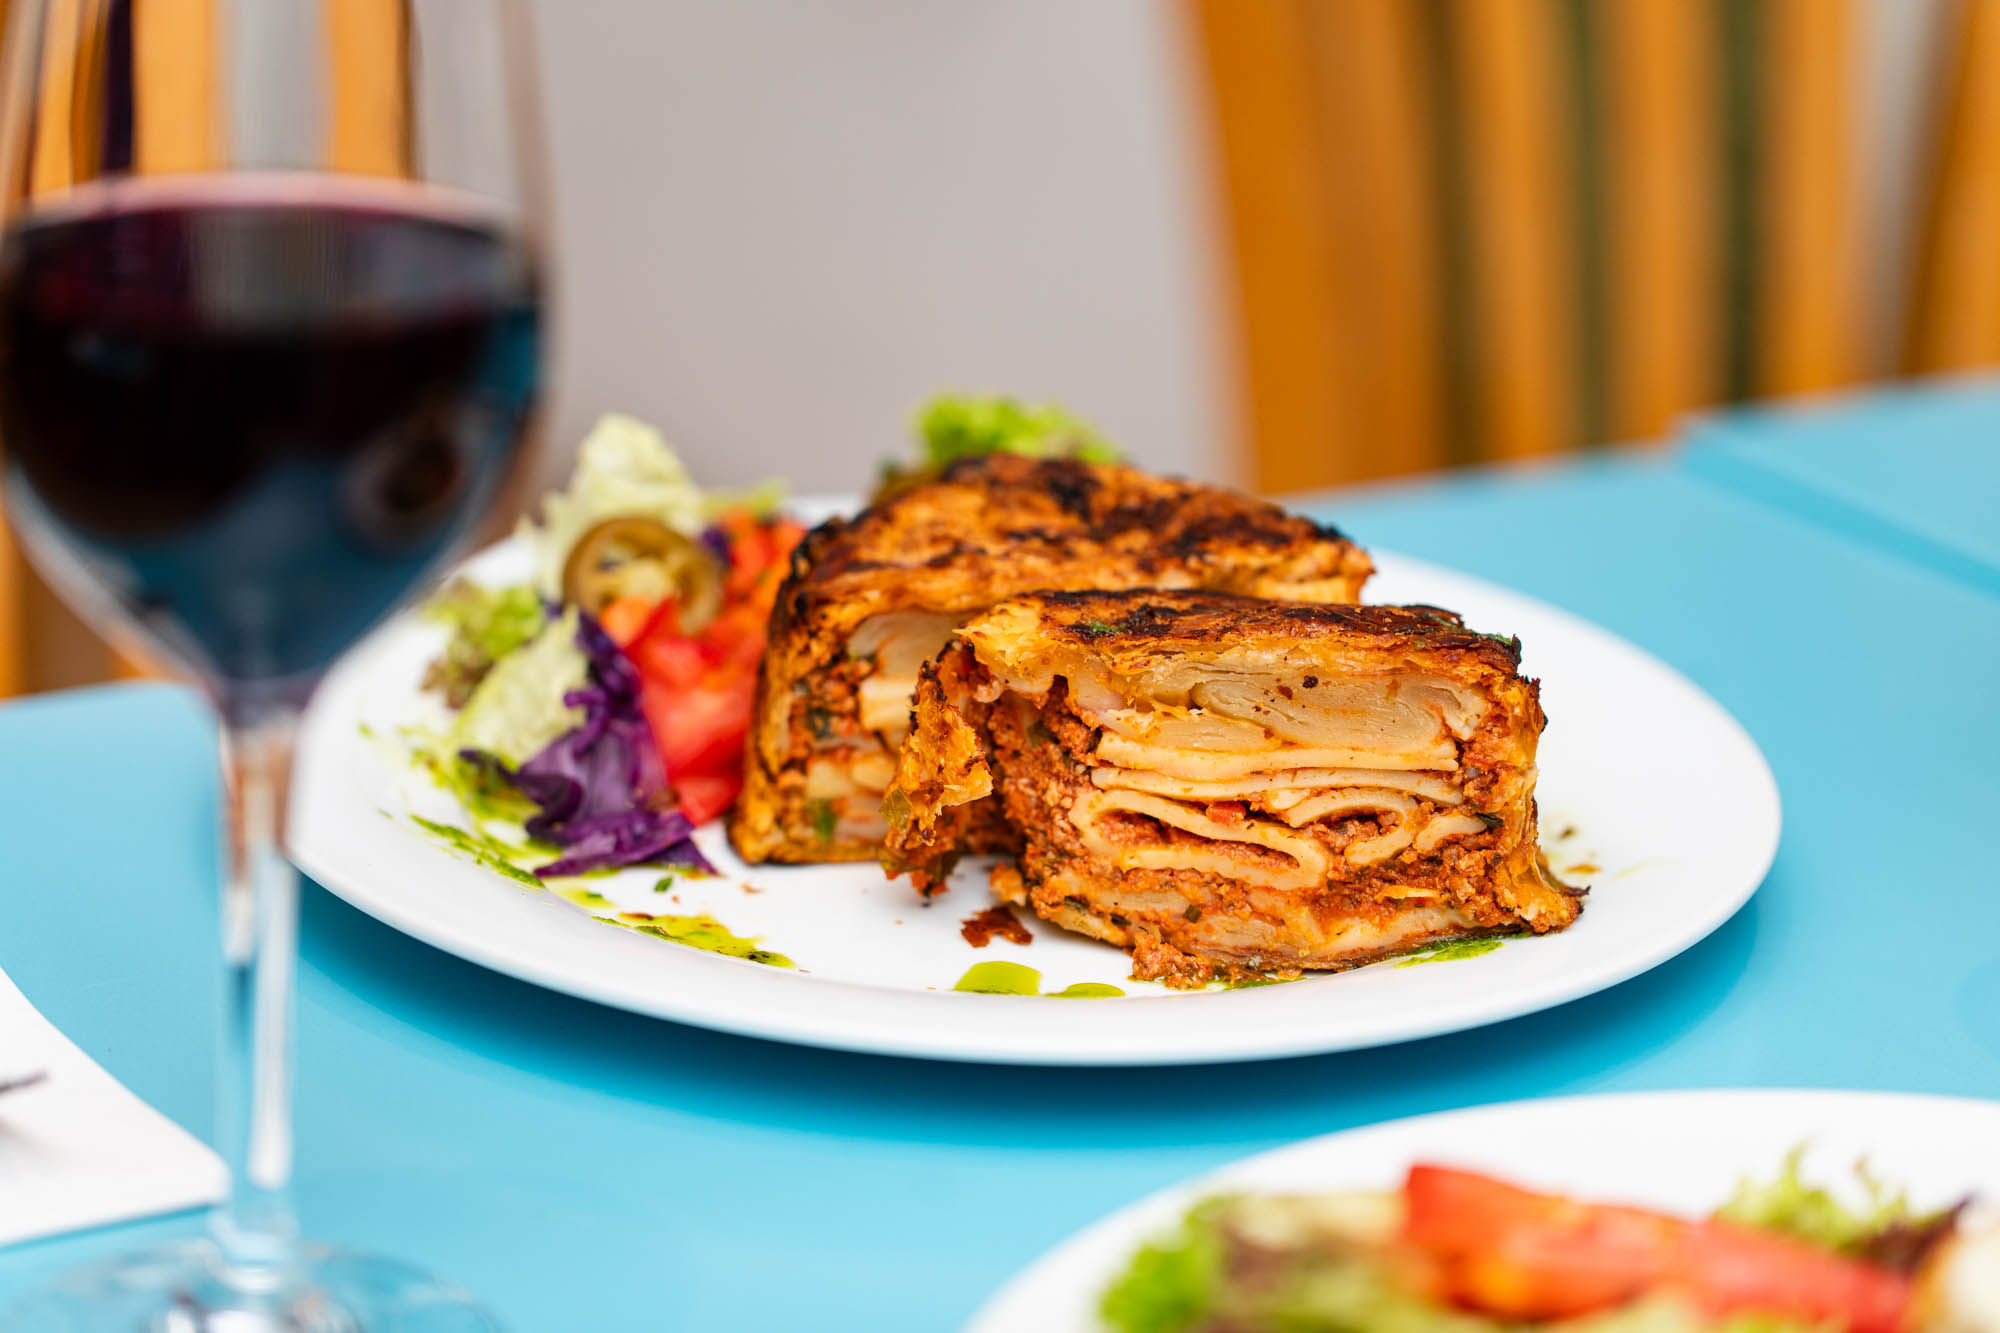 A plate of lasagne and salad with a glass of red wine served on a blue table.